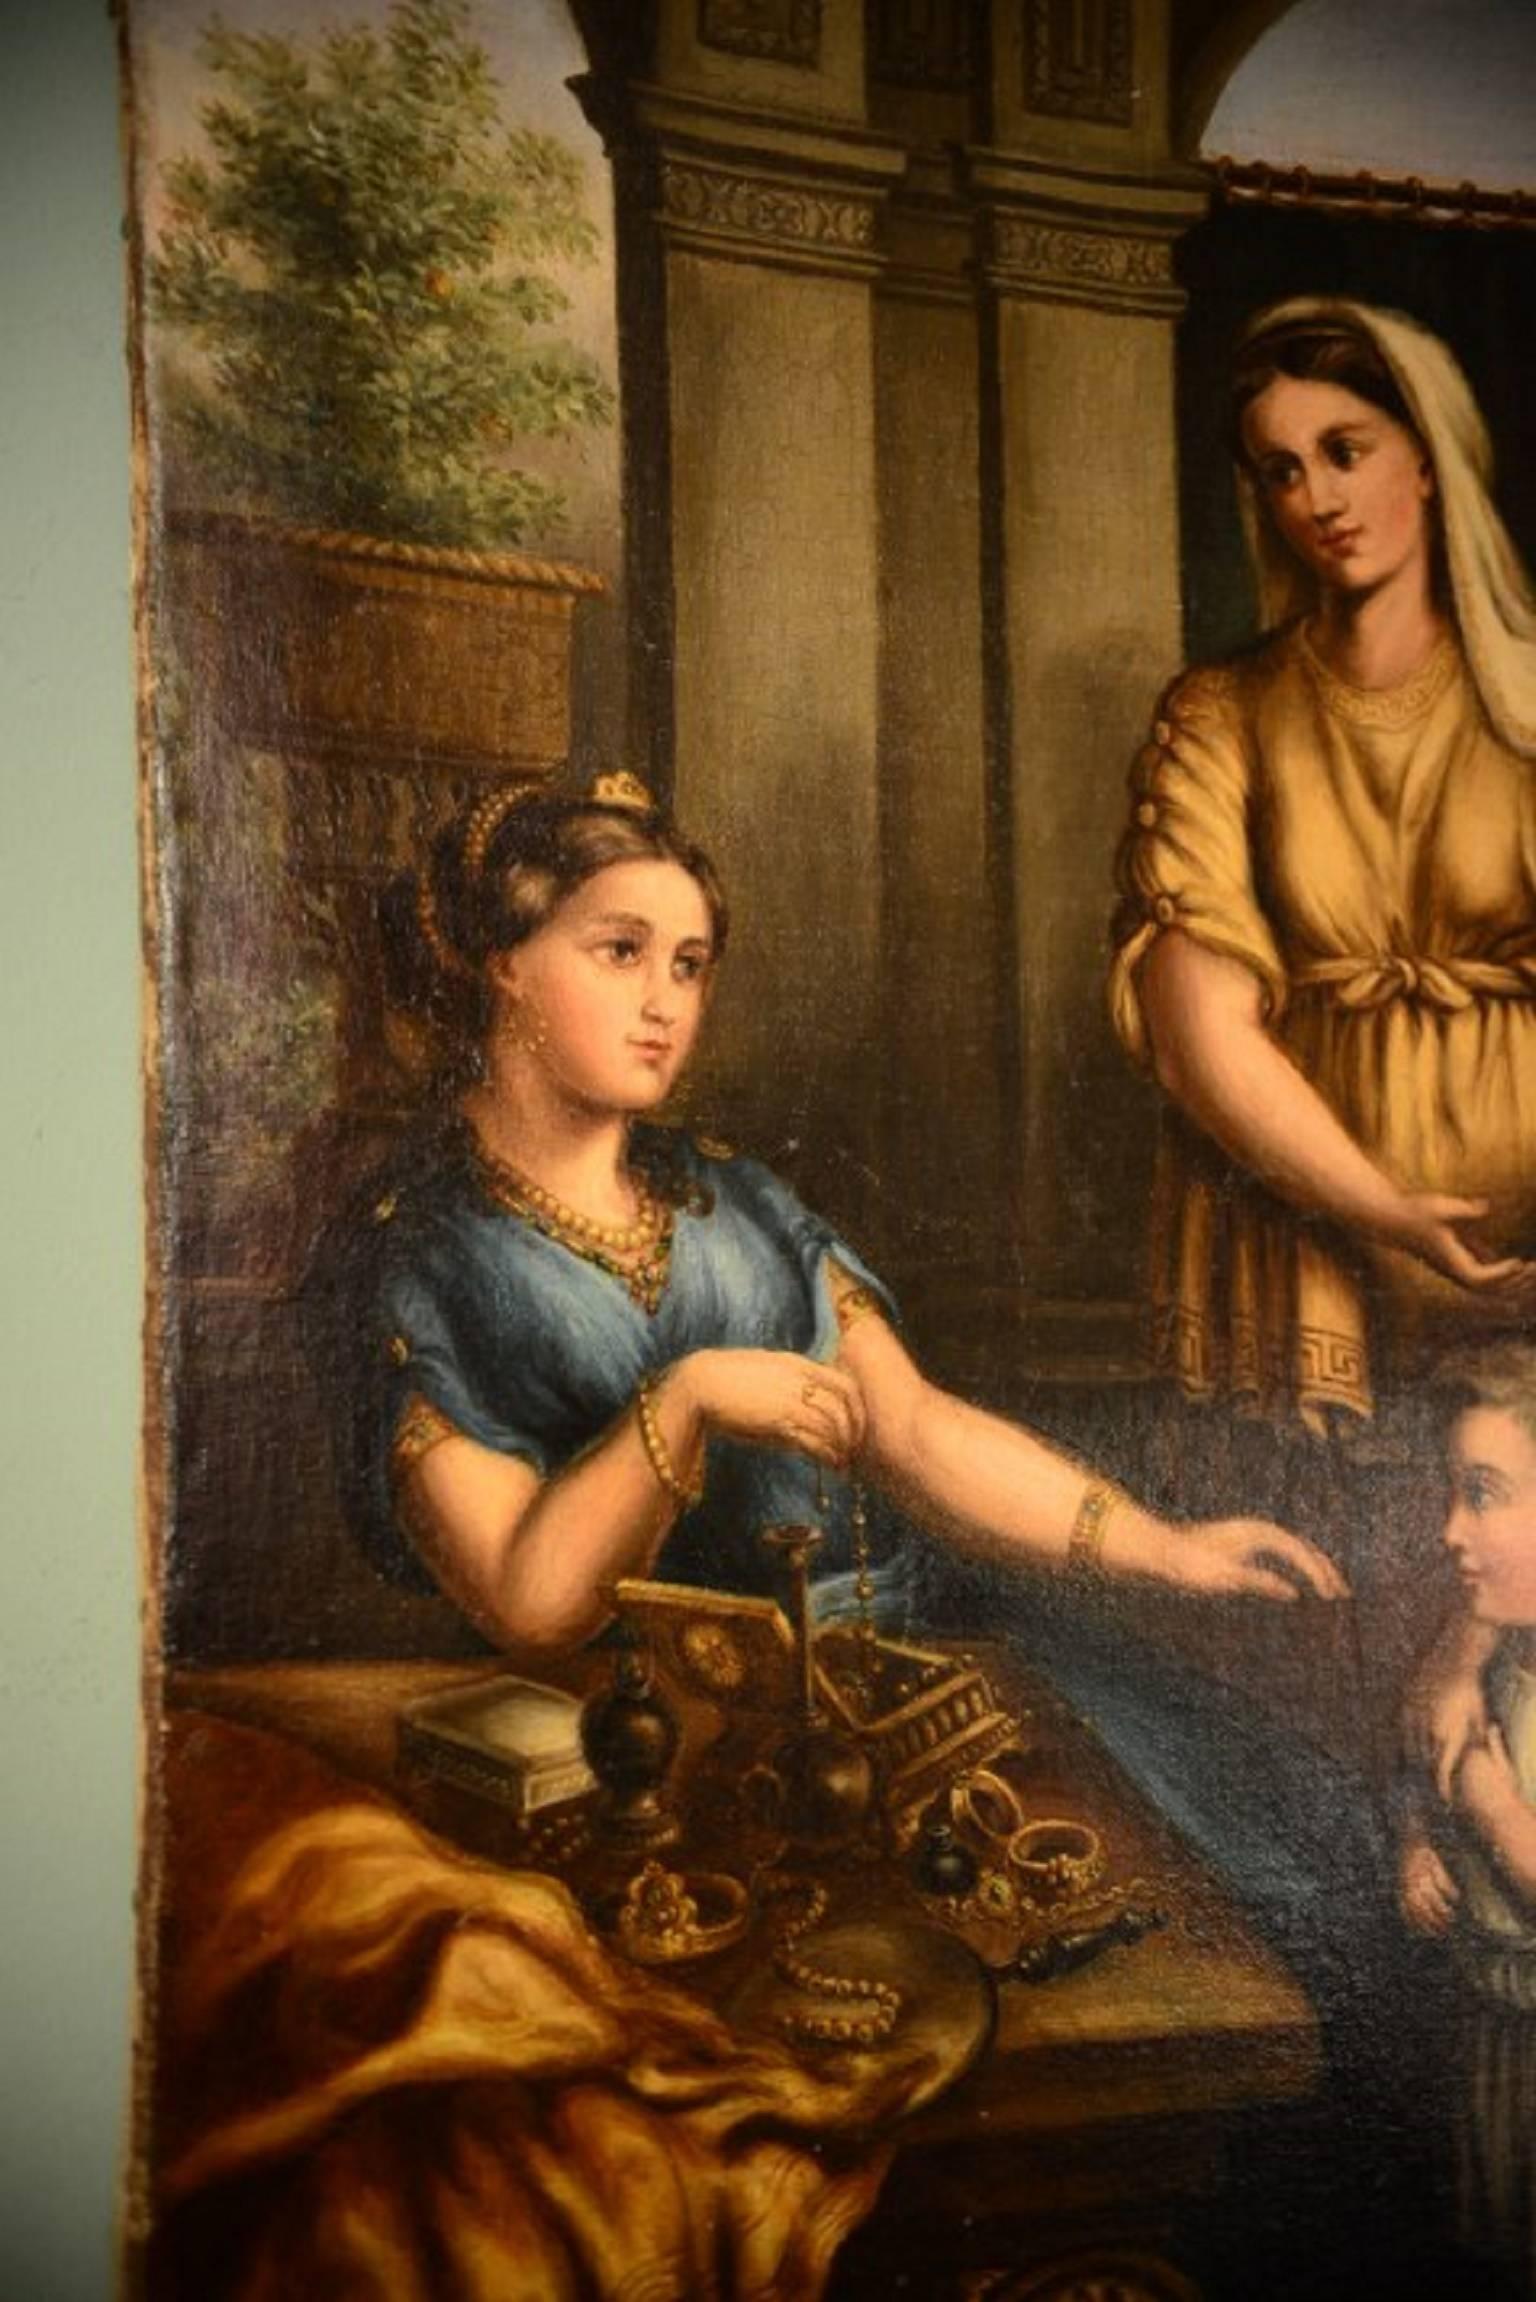 "Cornelia and her Jewels" is a Roman painting dating from, circa 1860.
In the painting, Cornelia, a wife of a Roman patrician is pictured with her two sons talking to a woman with a jewelry box who according to a story asks Cornelia where